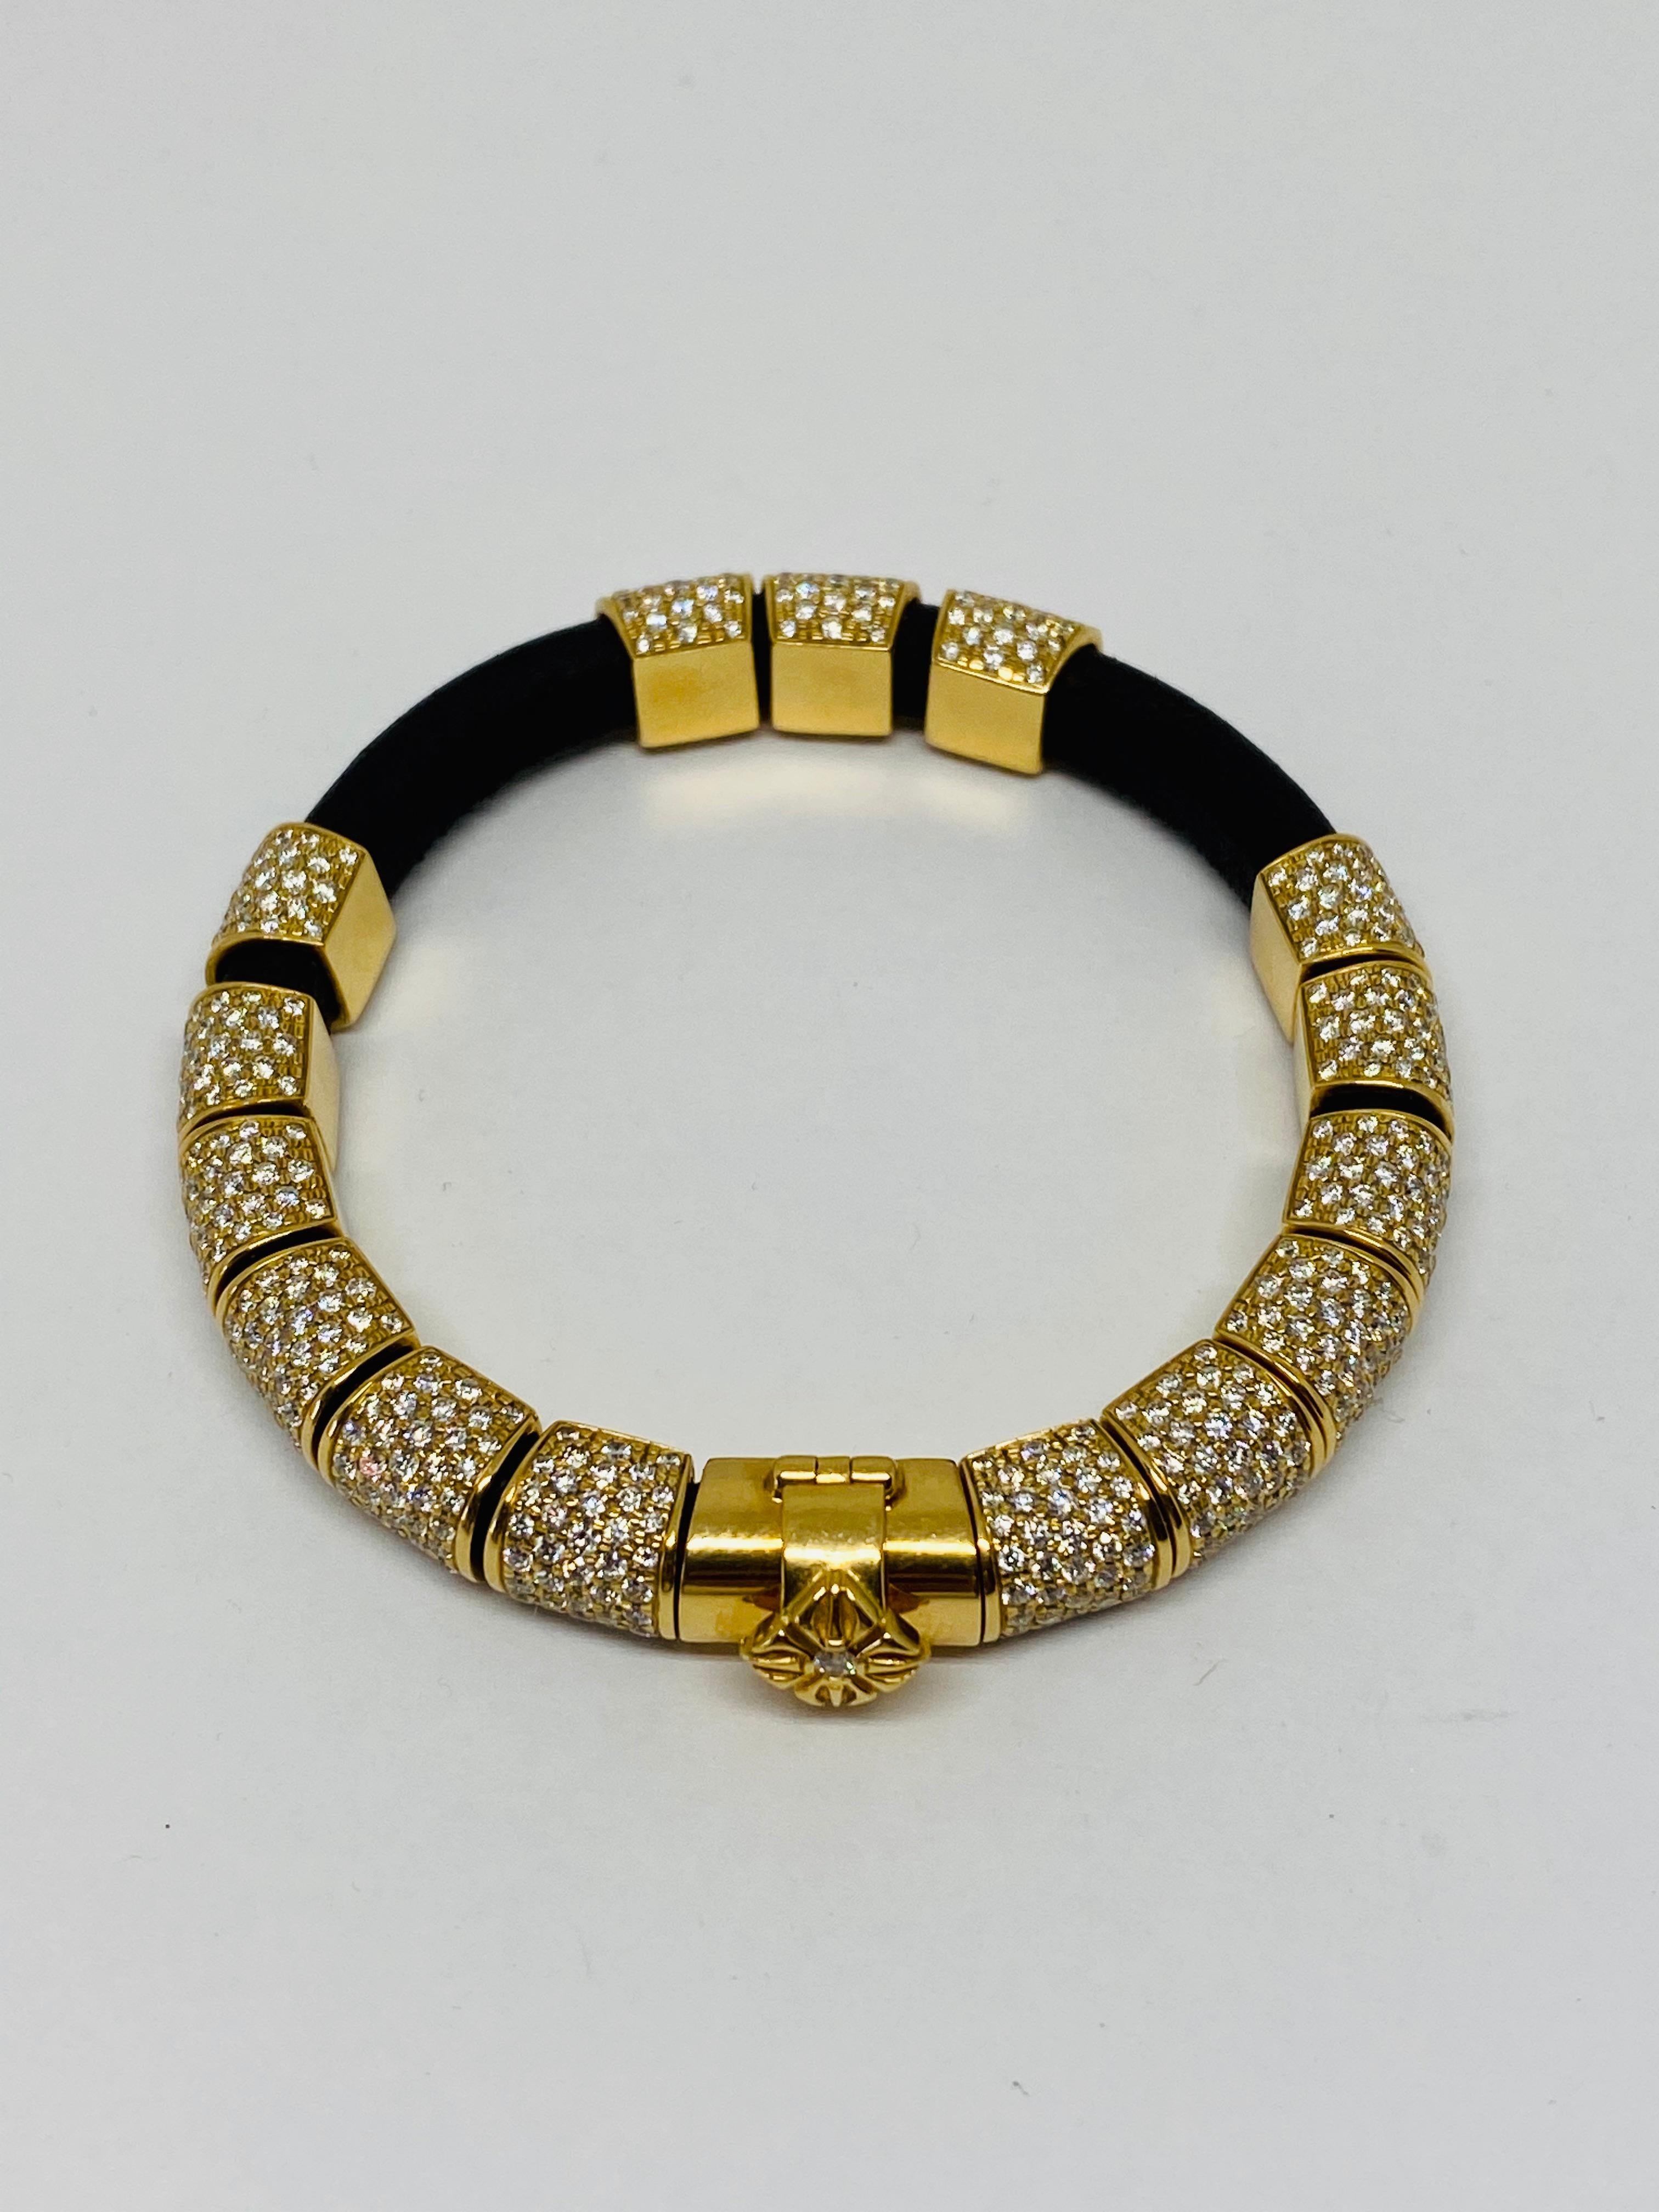 Shamballa 12ct Diamond 18K Yellow Gold and Leather Bracelet 

Product details:
750 18K yellow gold 
Round brilliant cut diamond 12ct
Black leather 
Total weight is 39.2 grams 
Signed Shamballa Jewels SJ, stamped 750K, serial number 1164